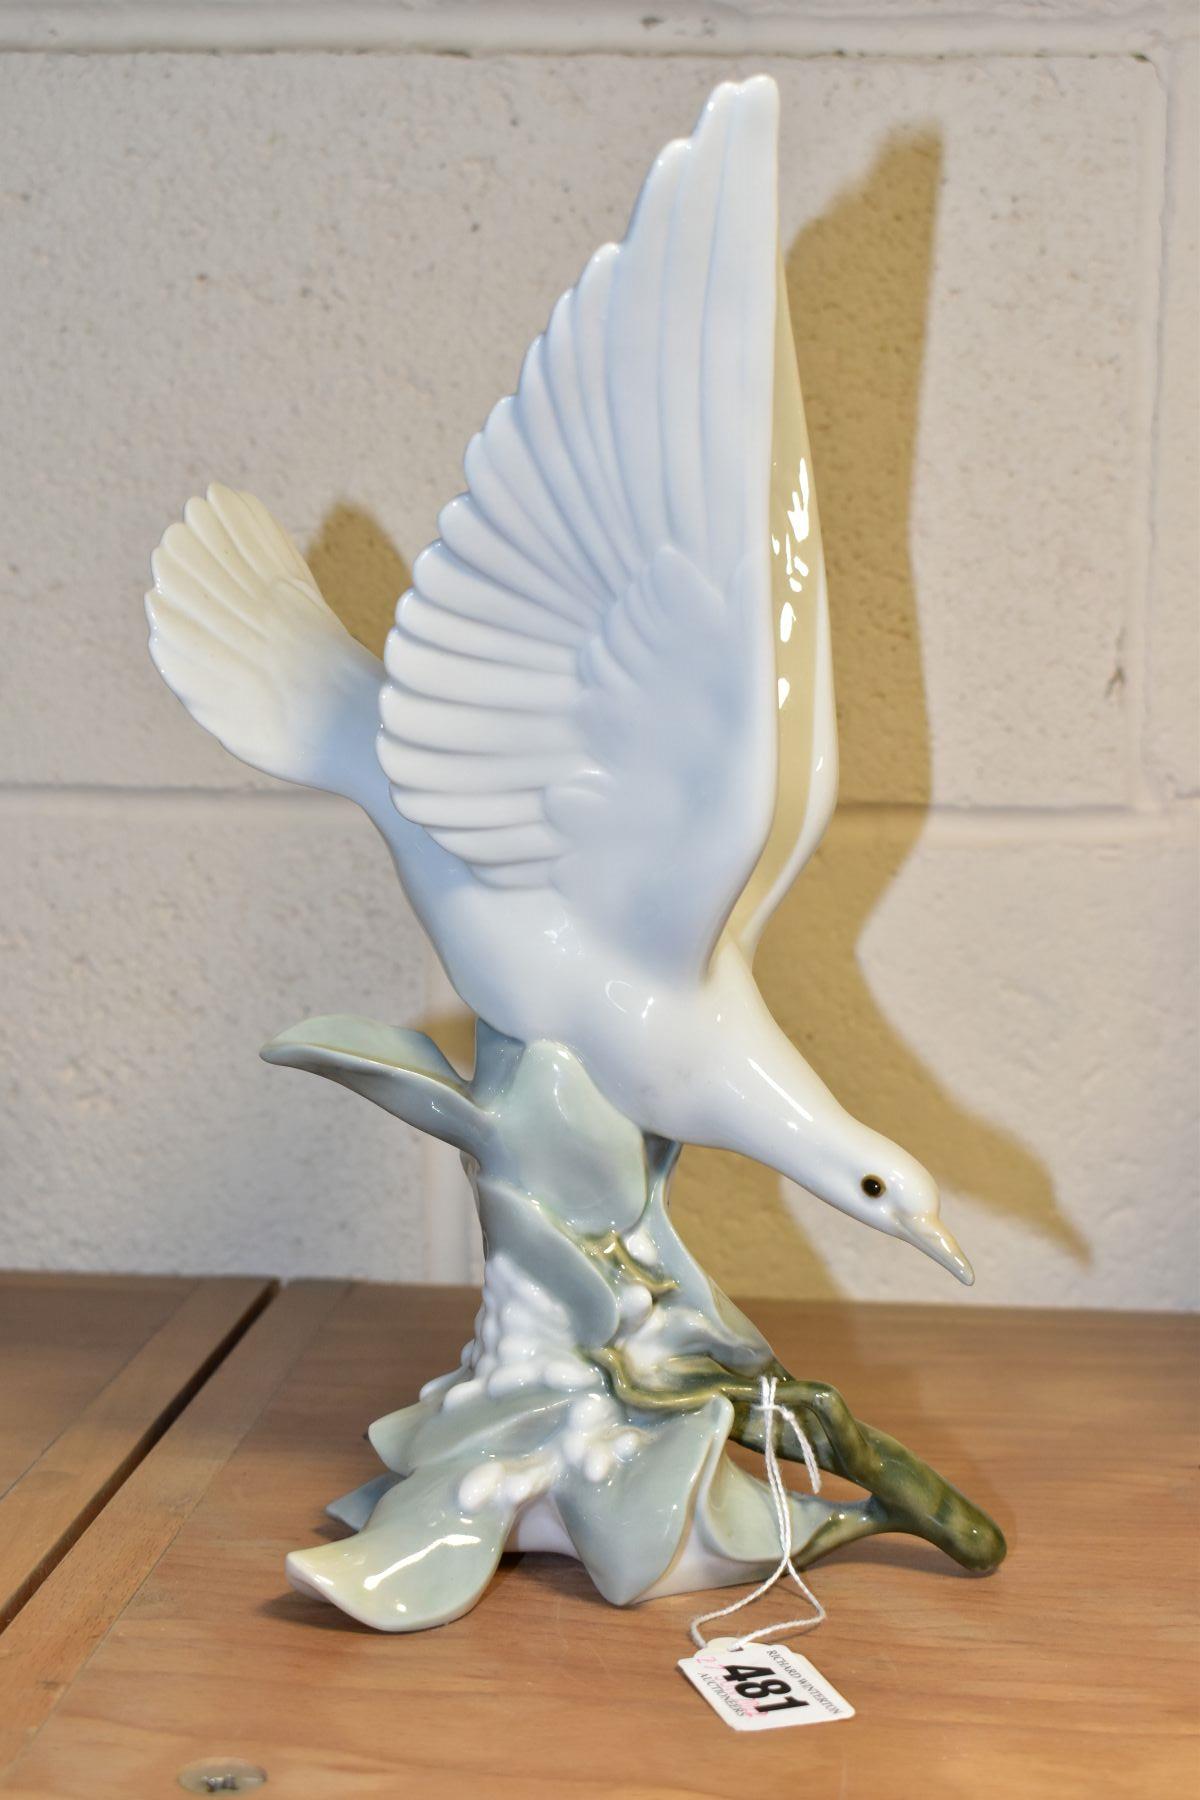 A LLADRO TURTLE DOVE, model no 4550, perched on leaves with wings raised, designed by Fulgencio